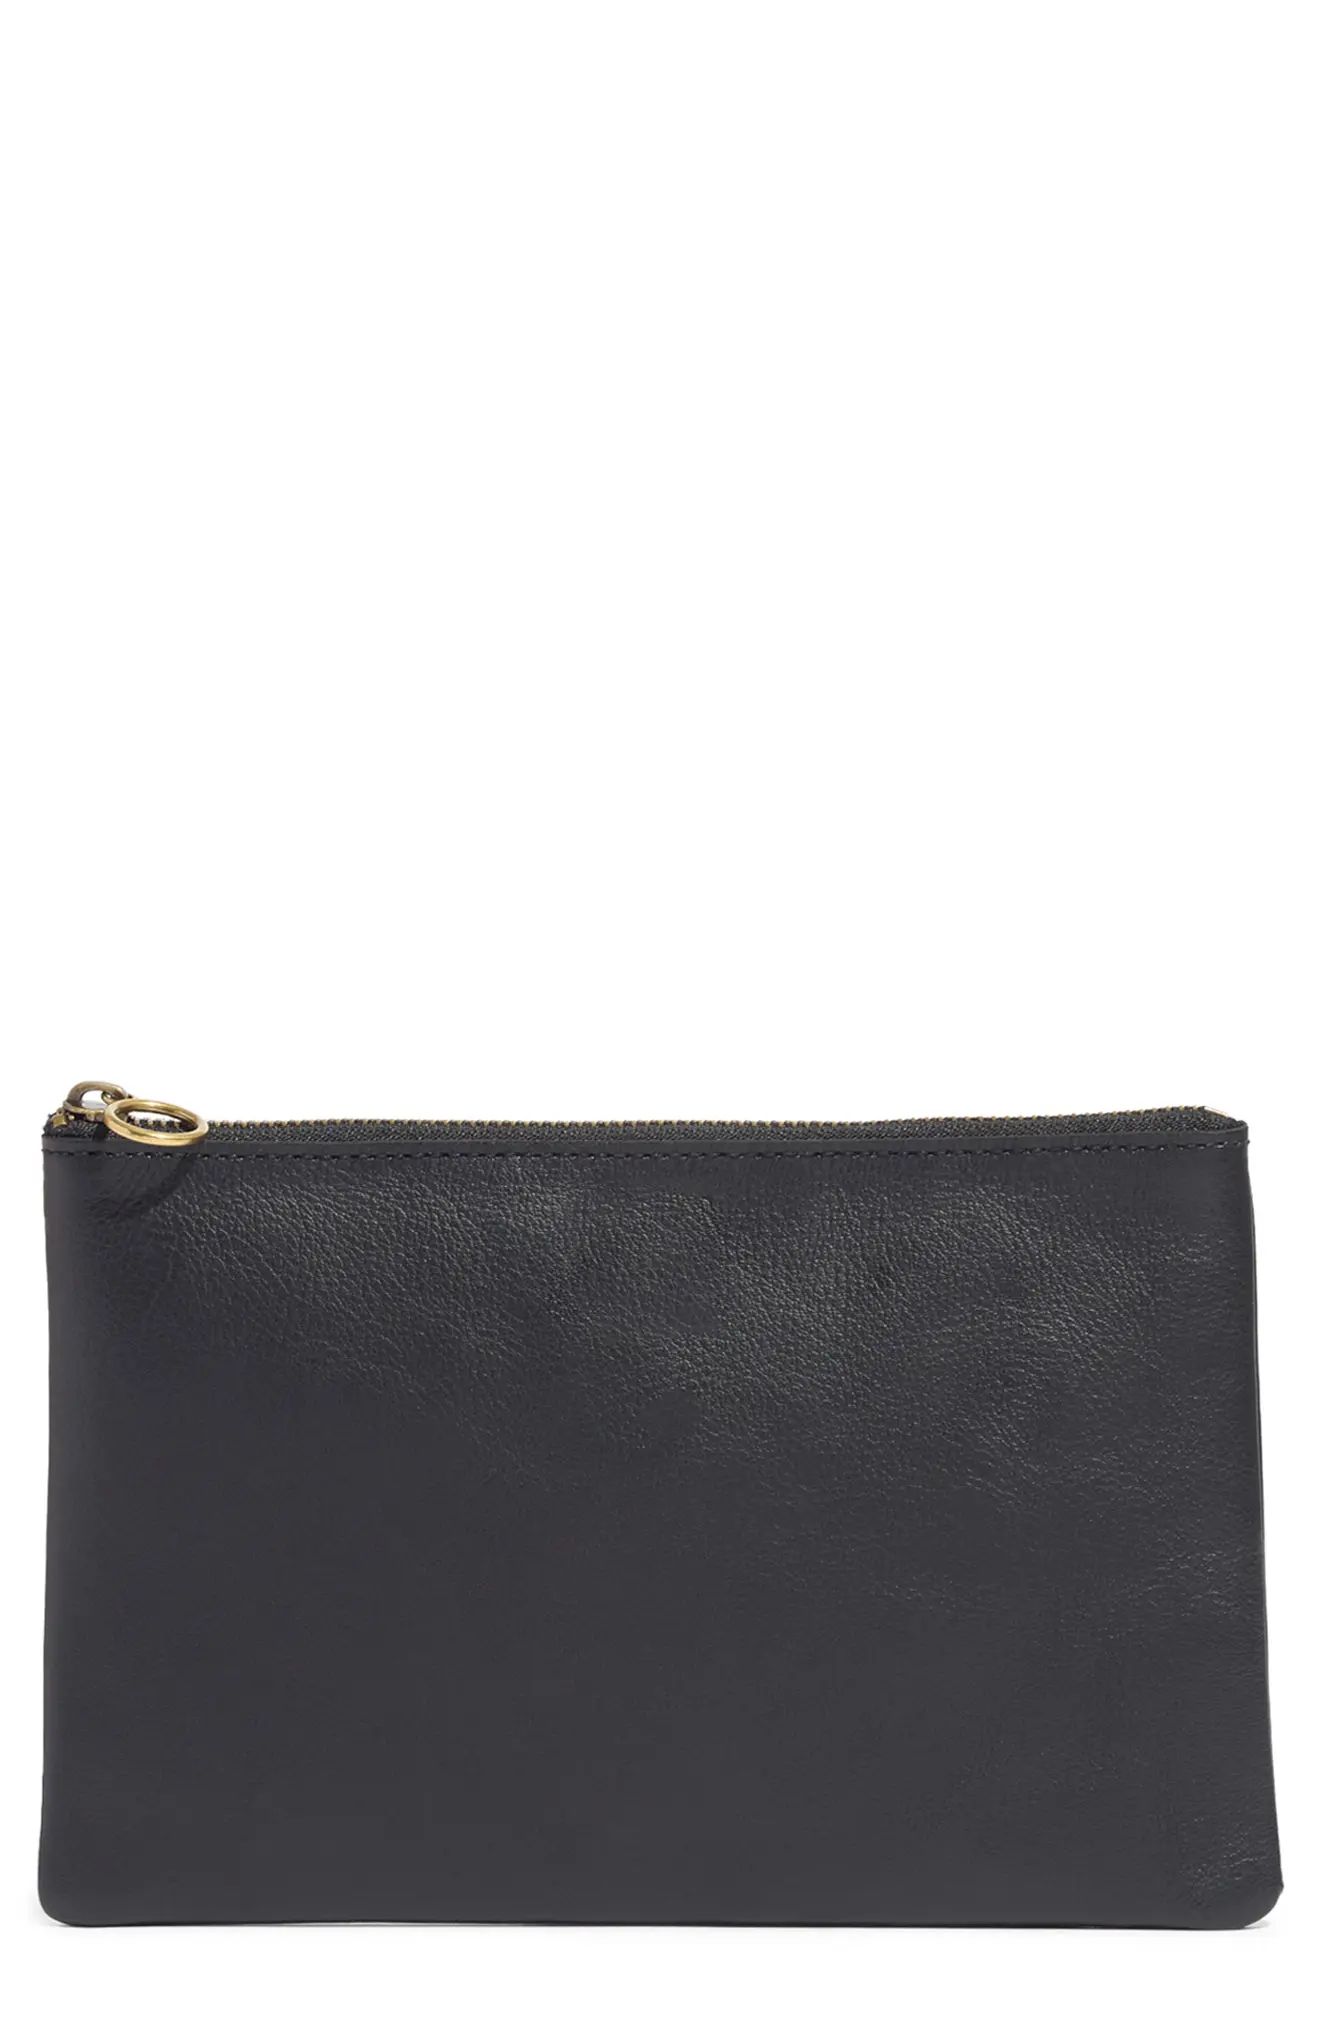 Madewell The Leather Pouch Clutch - Black | Nordstrom